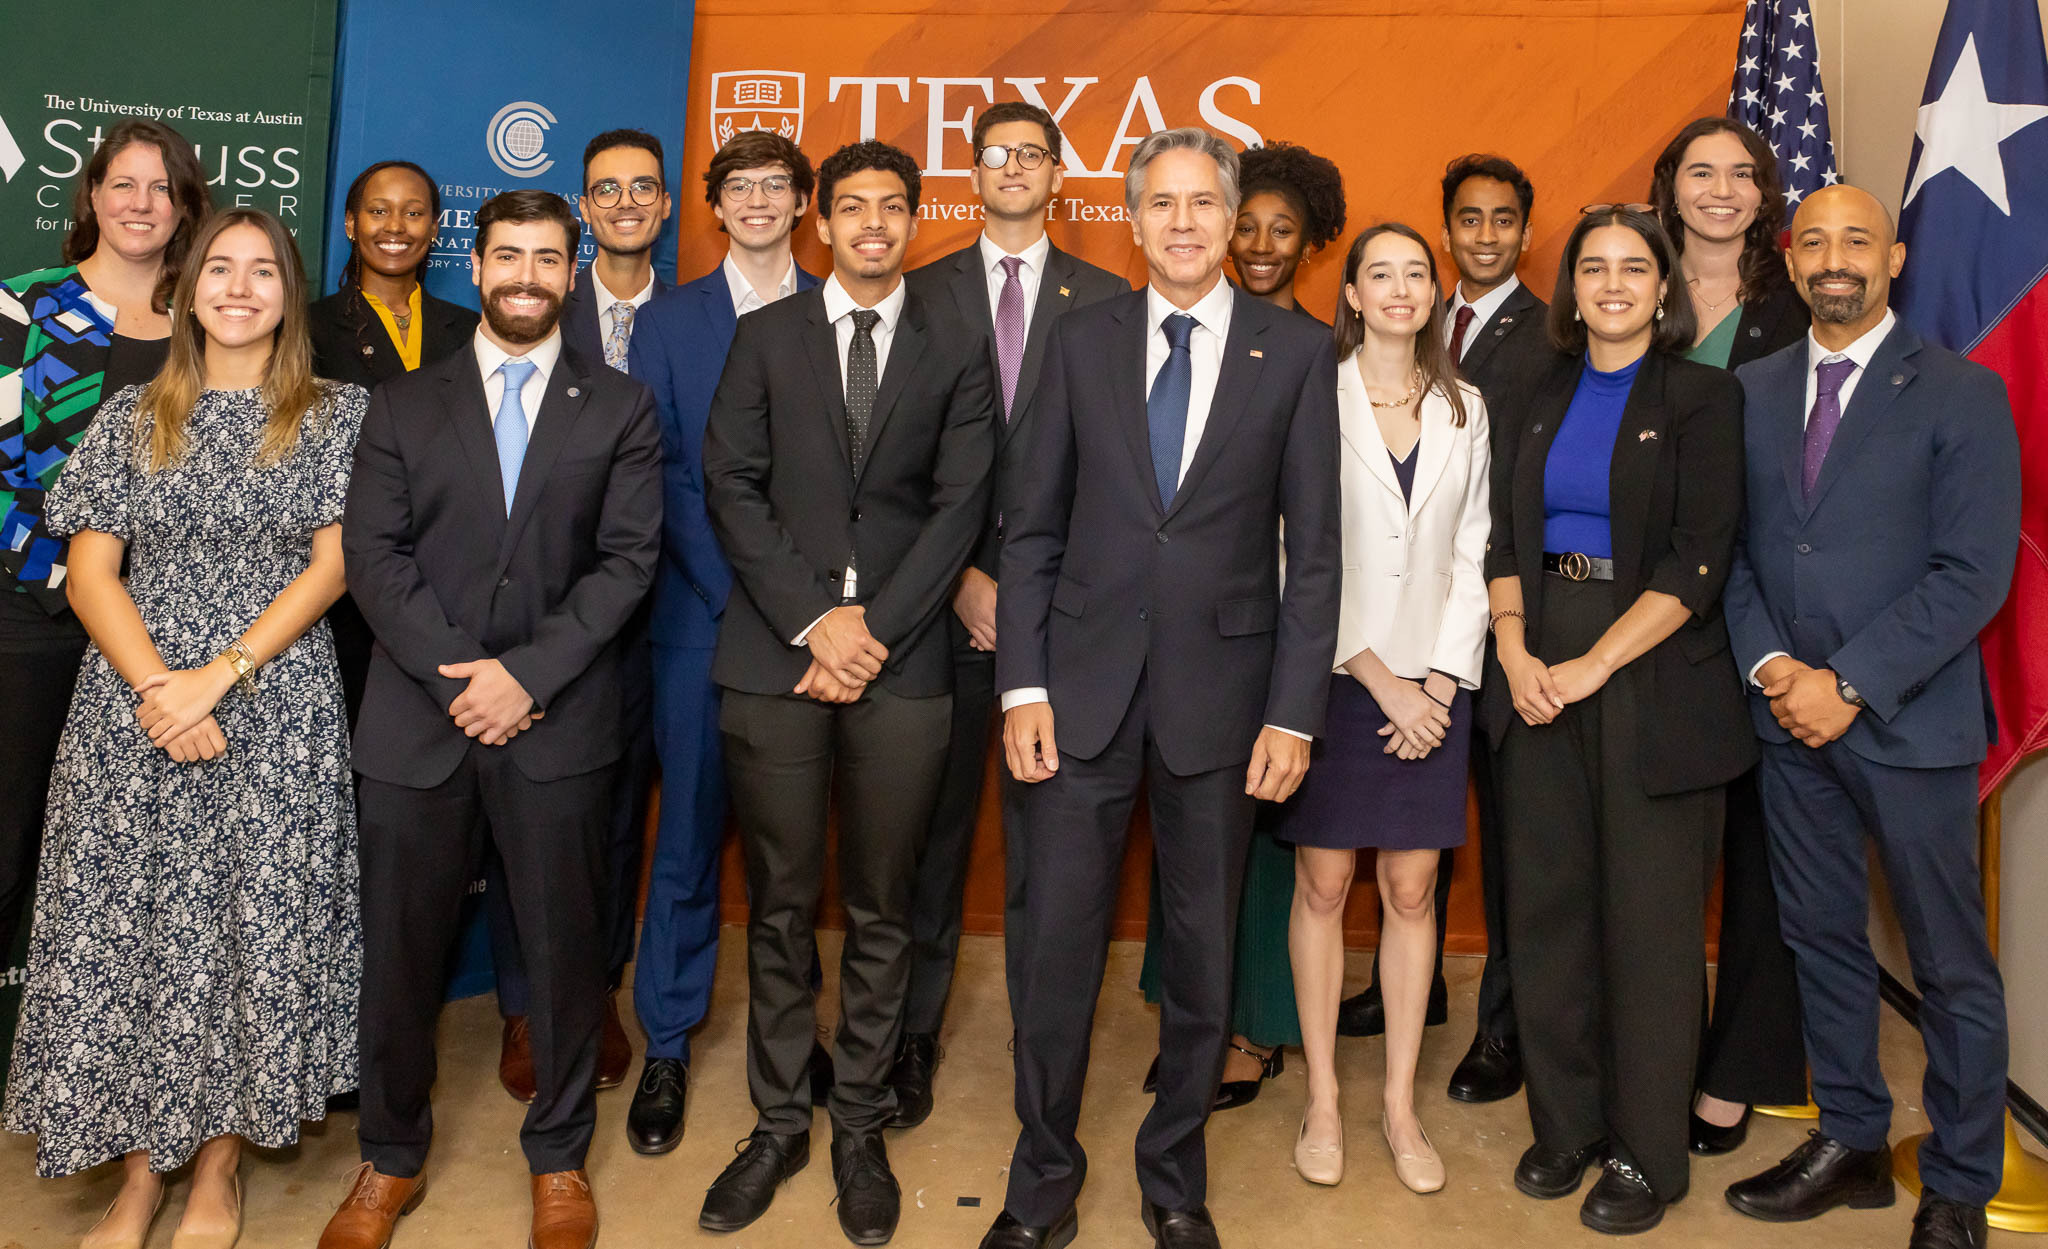 Shiru Kimani, along with fellow LBJ students, meeting with Secretary of State Anthony Blinken at a UT-Austin event.